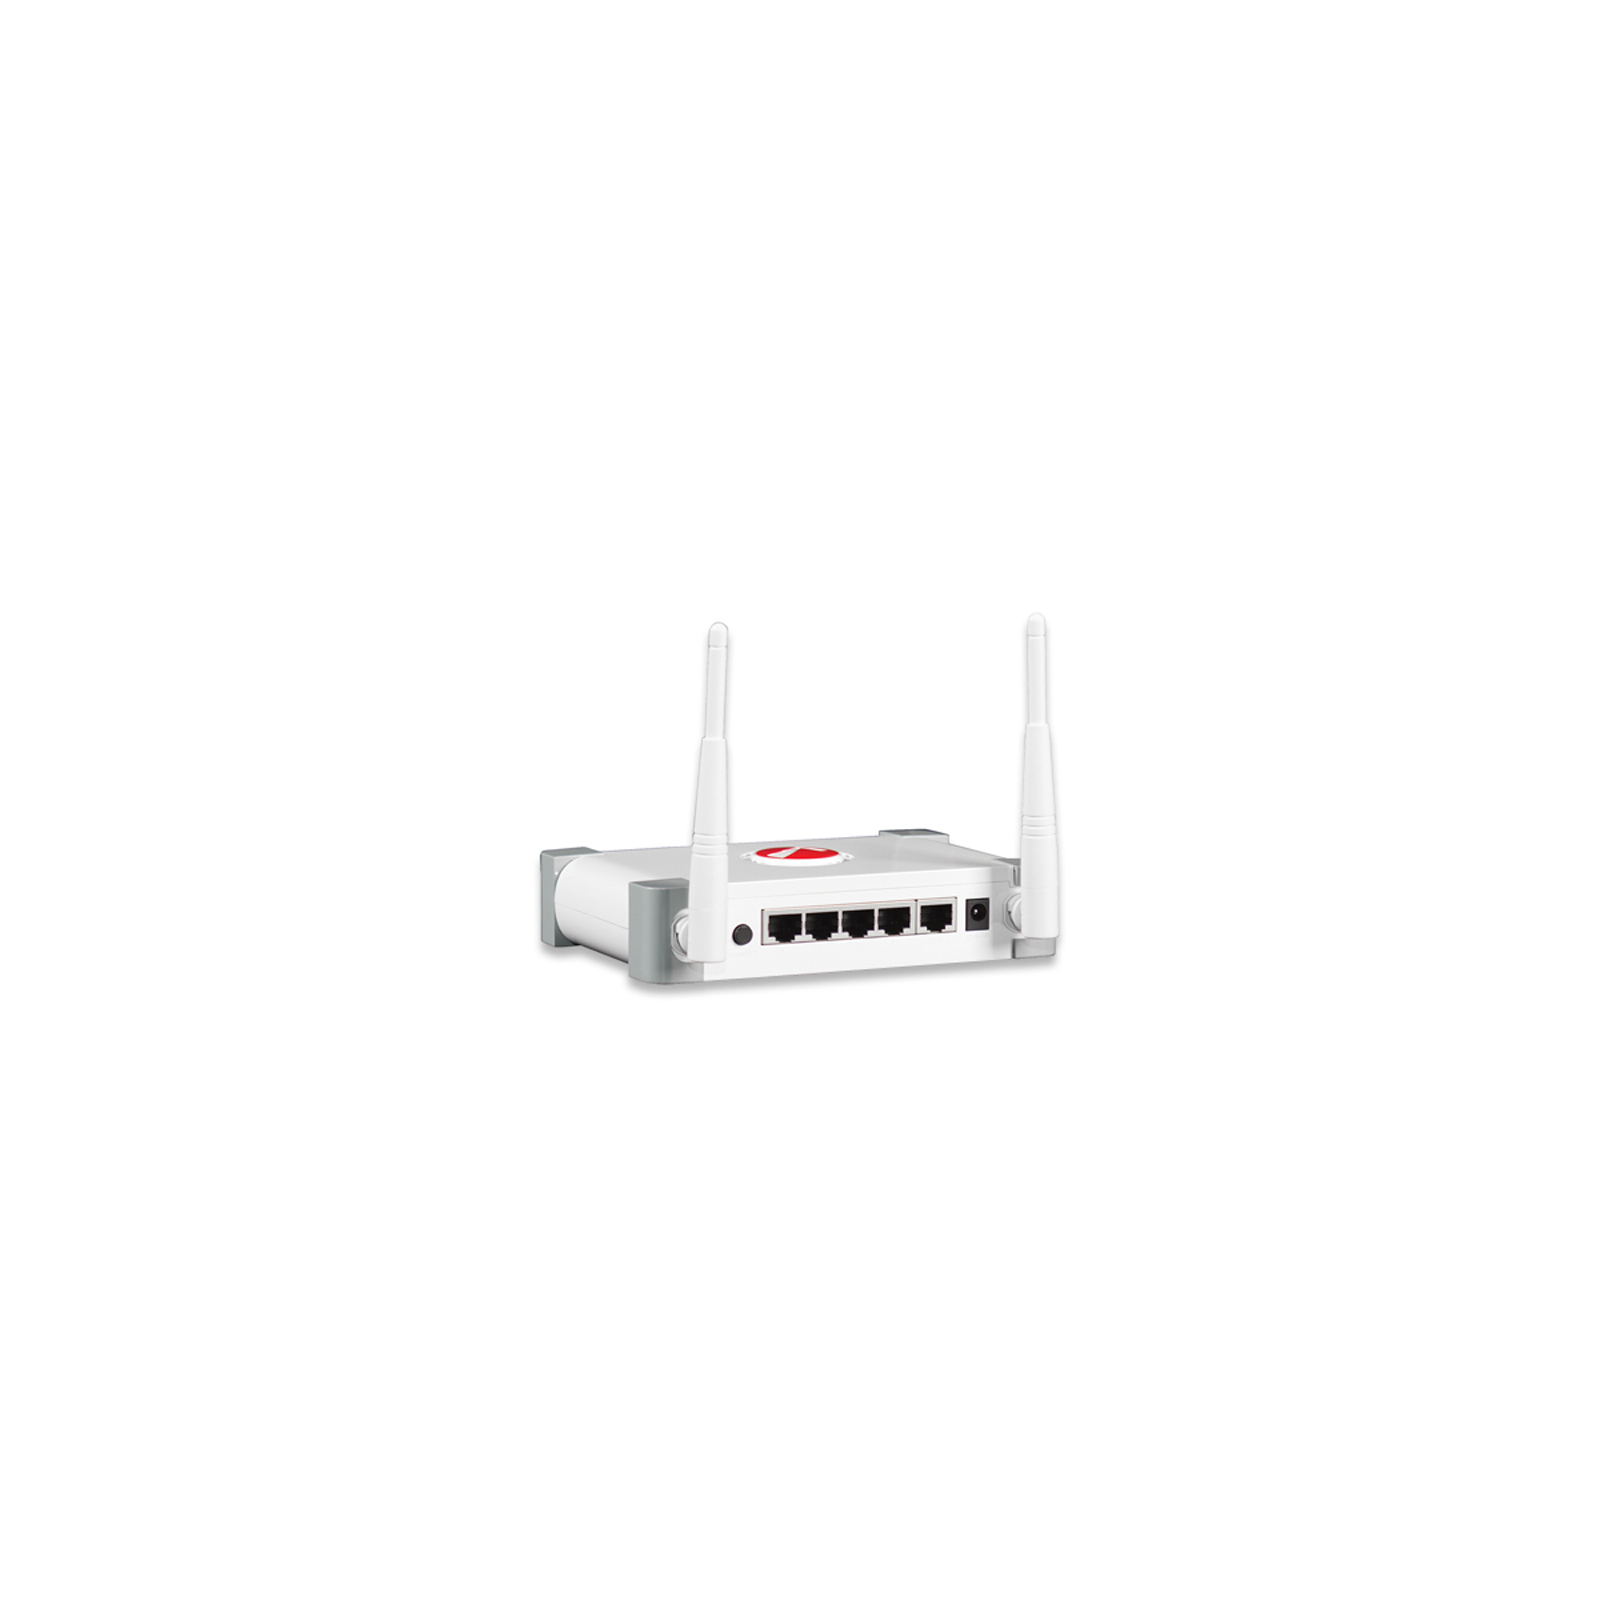 Маршрутизатор Intellinet 3G 4-Port Router MIMO 2T2R изображение 5